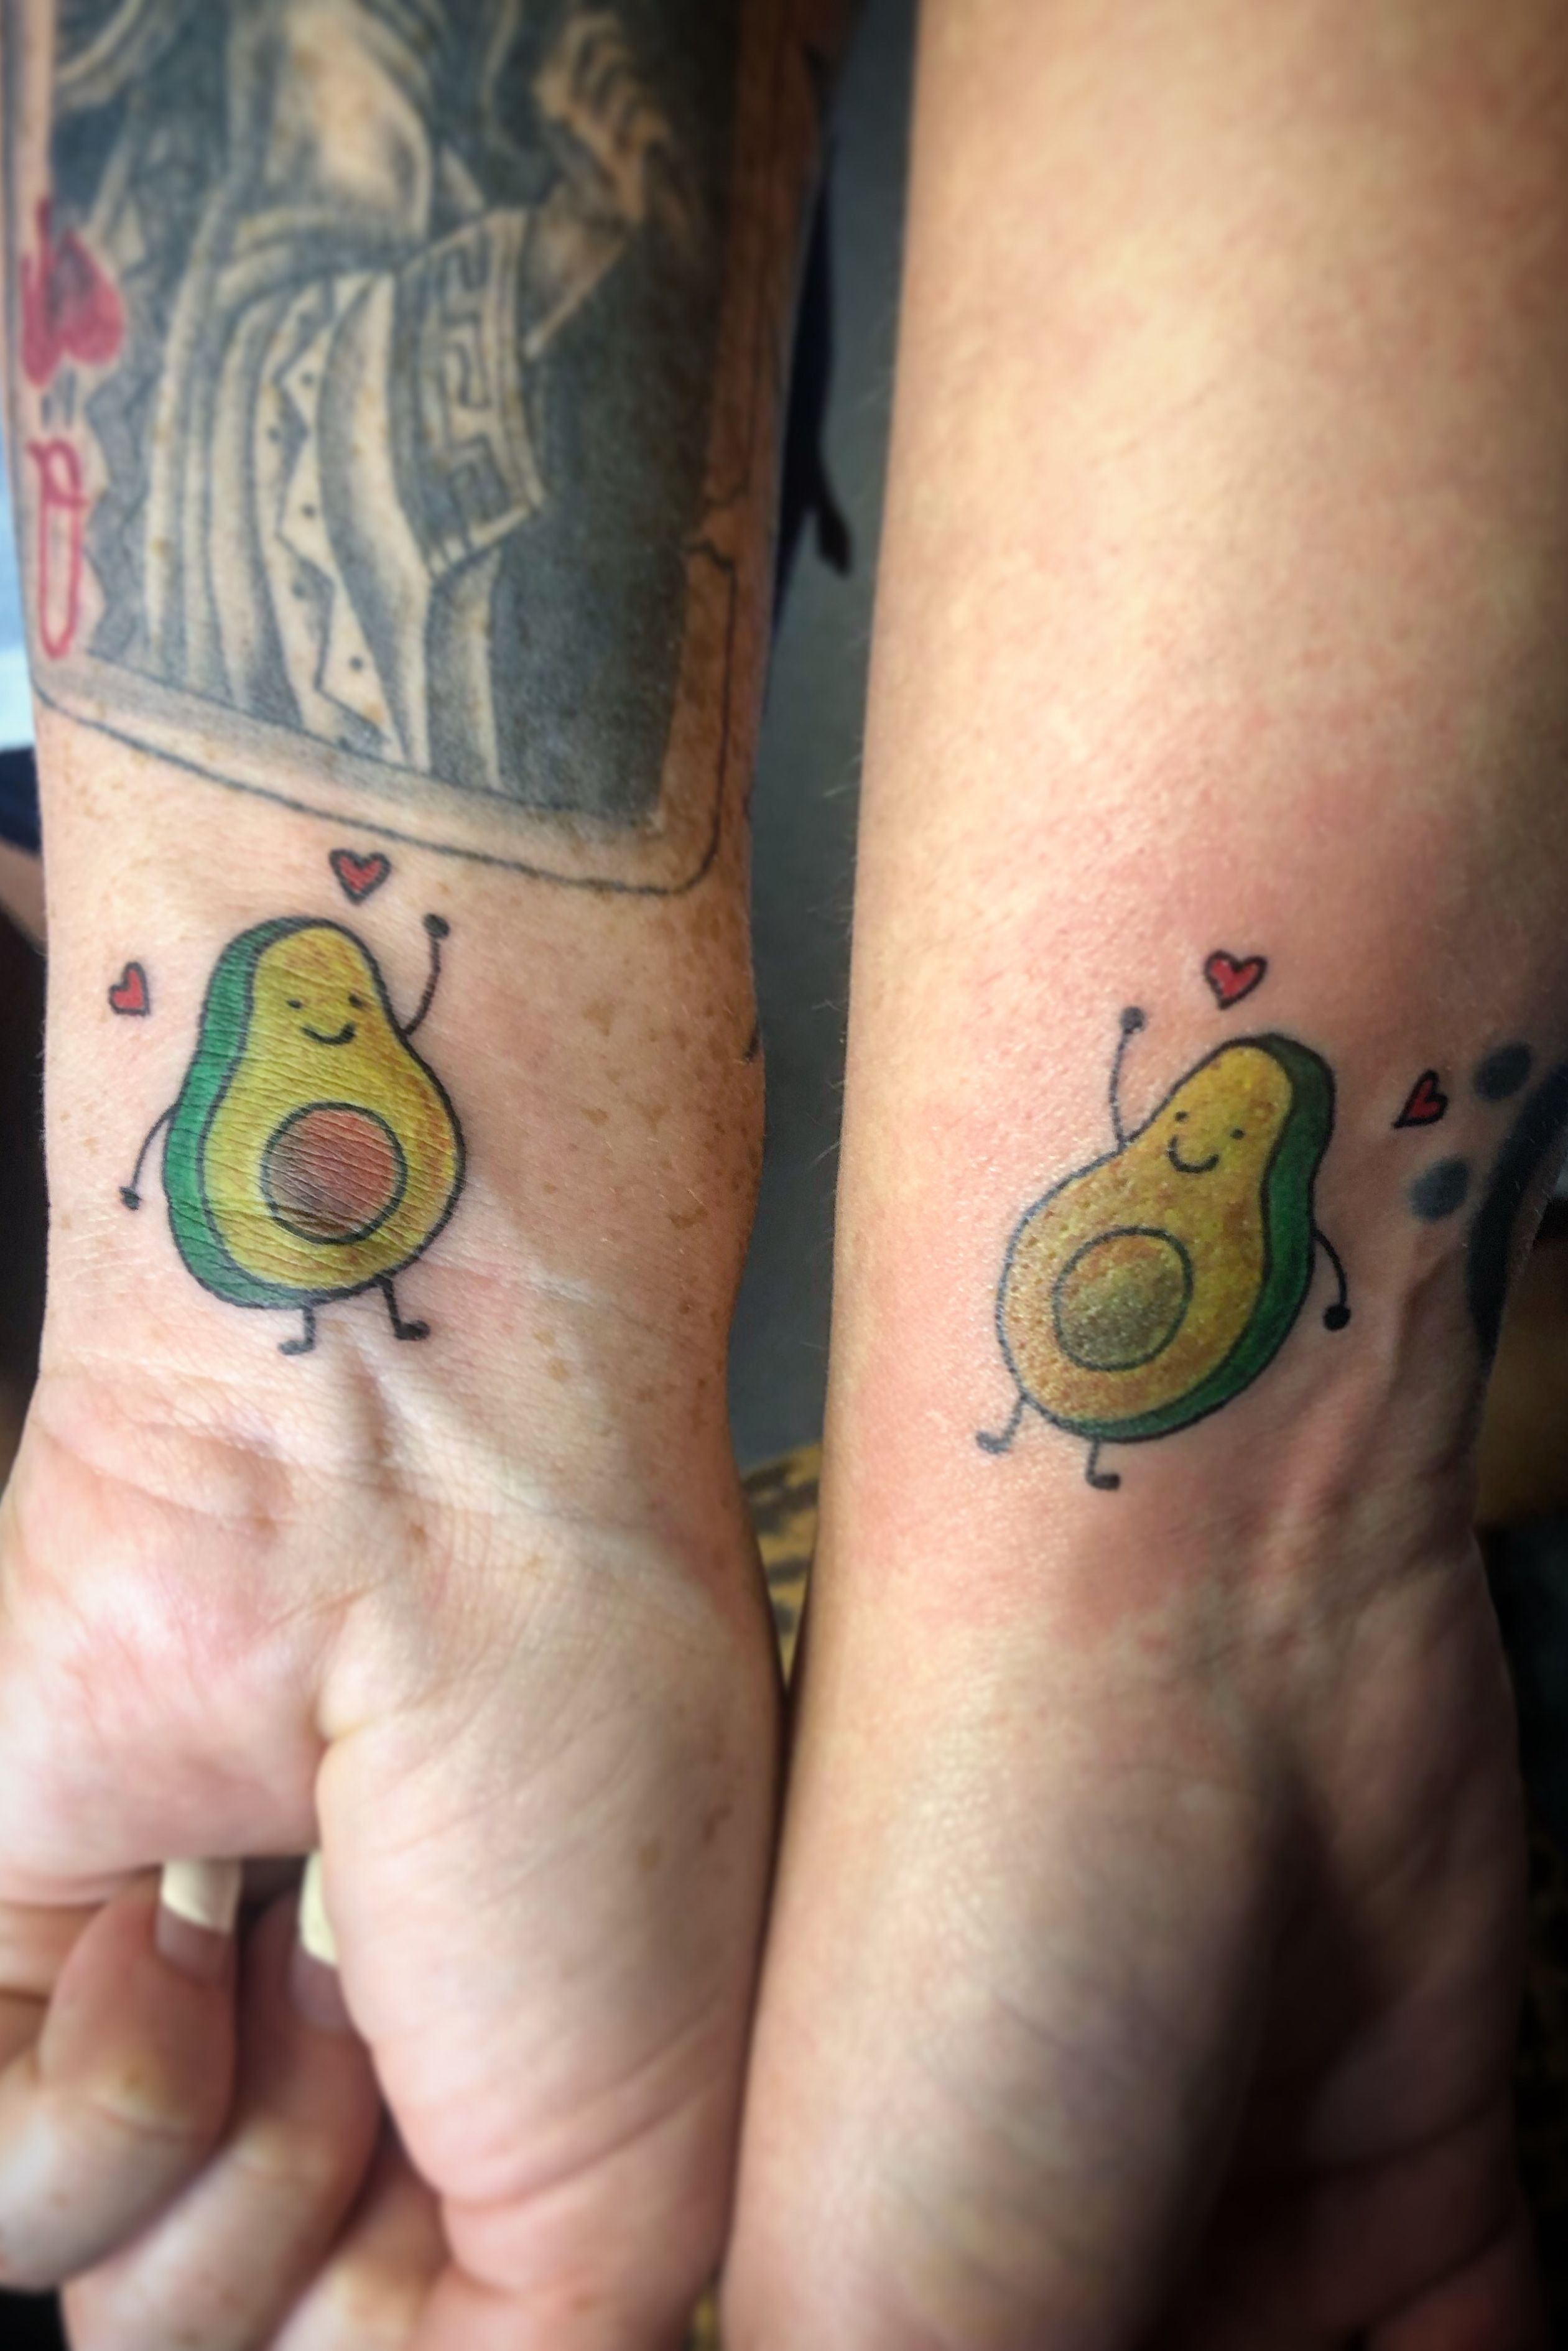 High fiving avocado matching tattoos   Brittany Sue Tattoo  Facebook